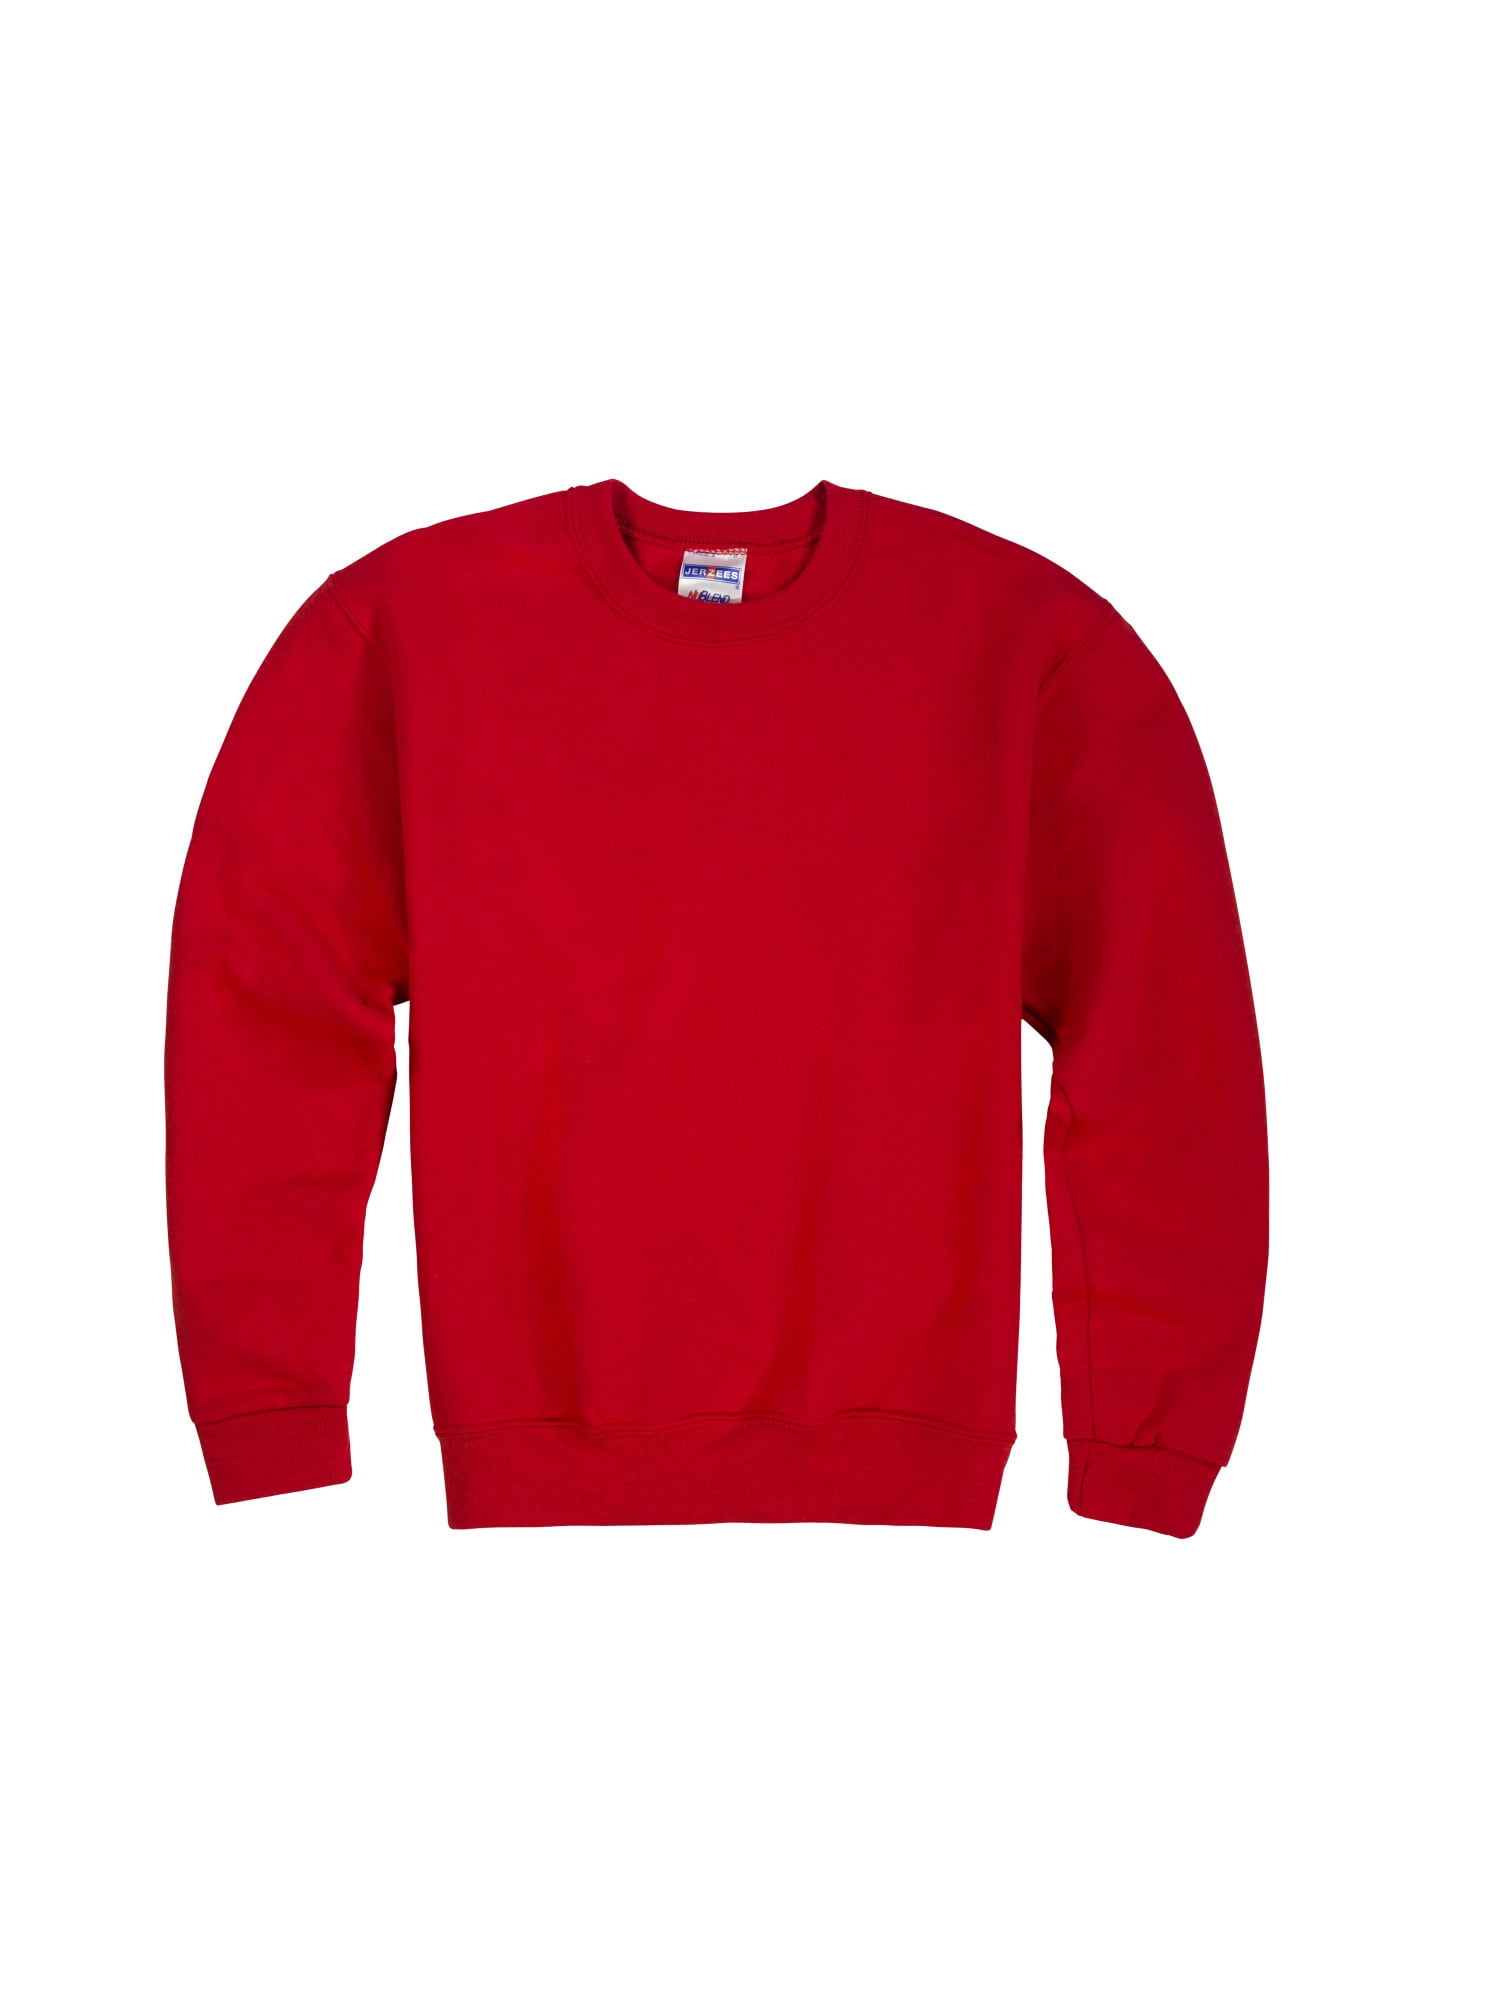 Jerzees kids cardigan in Bright Red 9-10